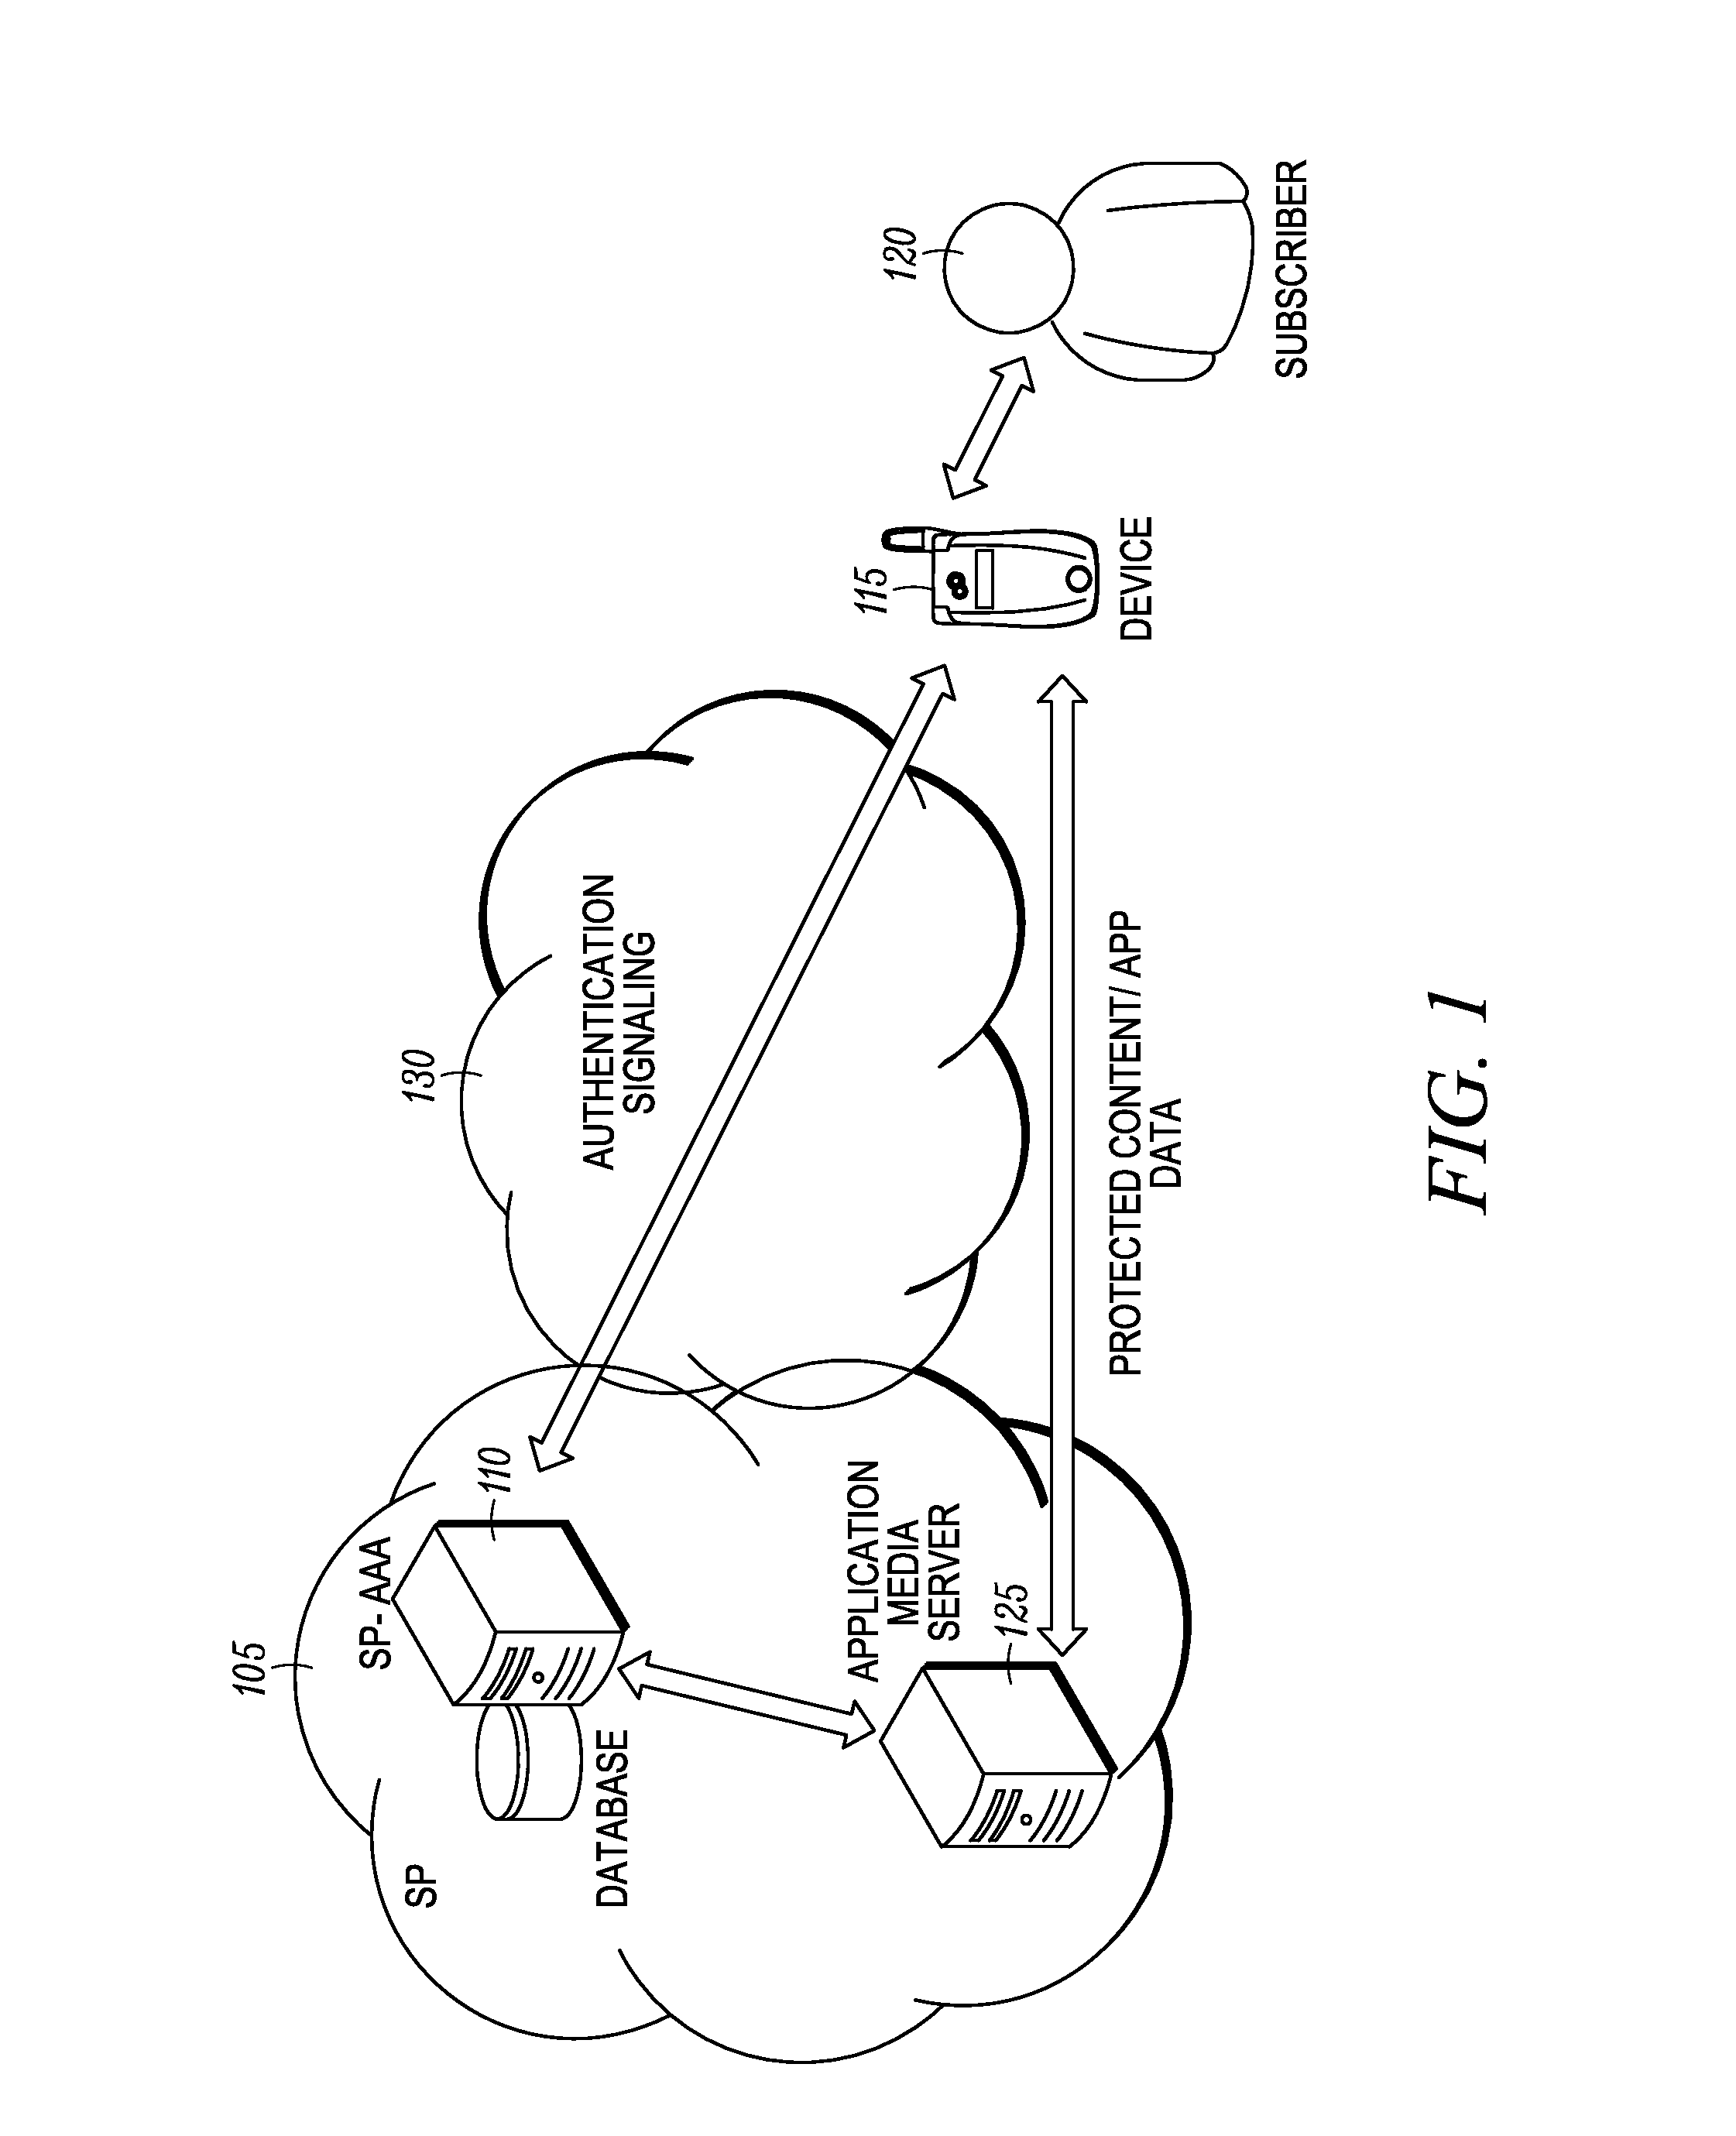 System and method for cognizant transport layer security (CTLS)